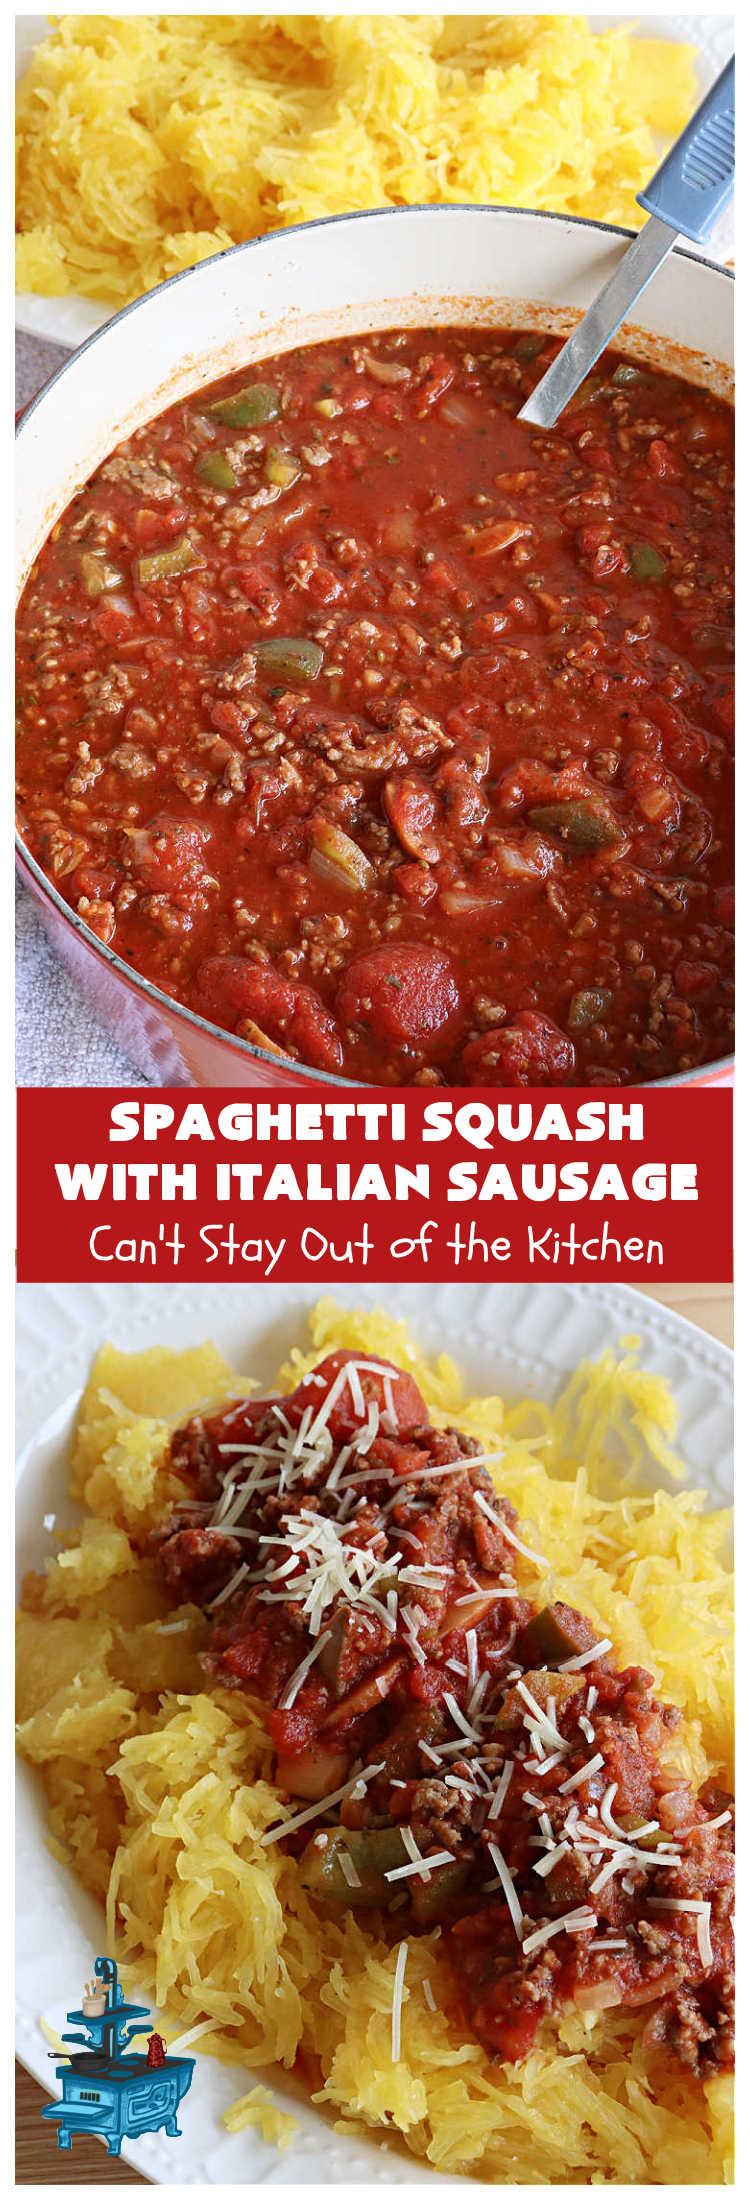 Spaghetti Squash with Italian Sausage | Can't Stay Out of the Kitchen | this delicious entree is terrific for those looking for tasty #LowCalorie meals. #SpaghettiSquash is substituted for regular #pasta in this #healthy version of a family favorite. Delicious way to enjoy #spaghetti but without all the #calories & #carbs. #ItalianSausage #GroundBeef #tomatoes #GlutenFree #SpaghettiSquashWithItalianSausage